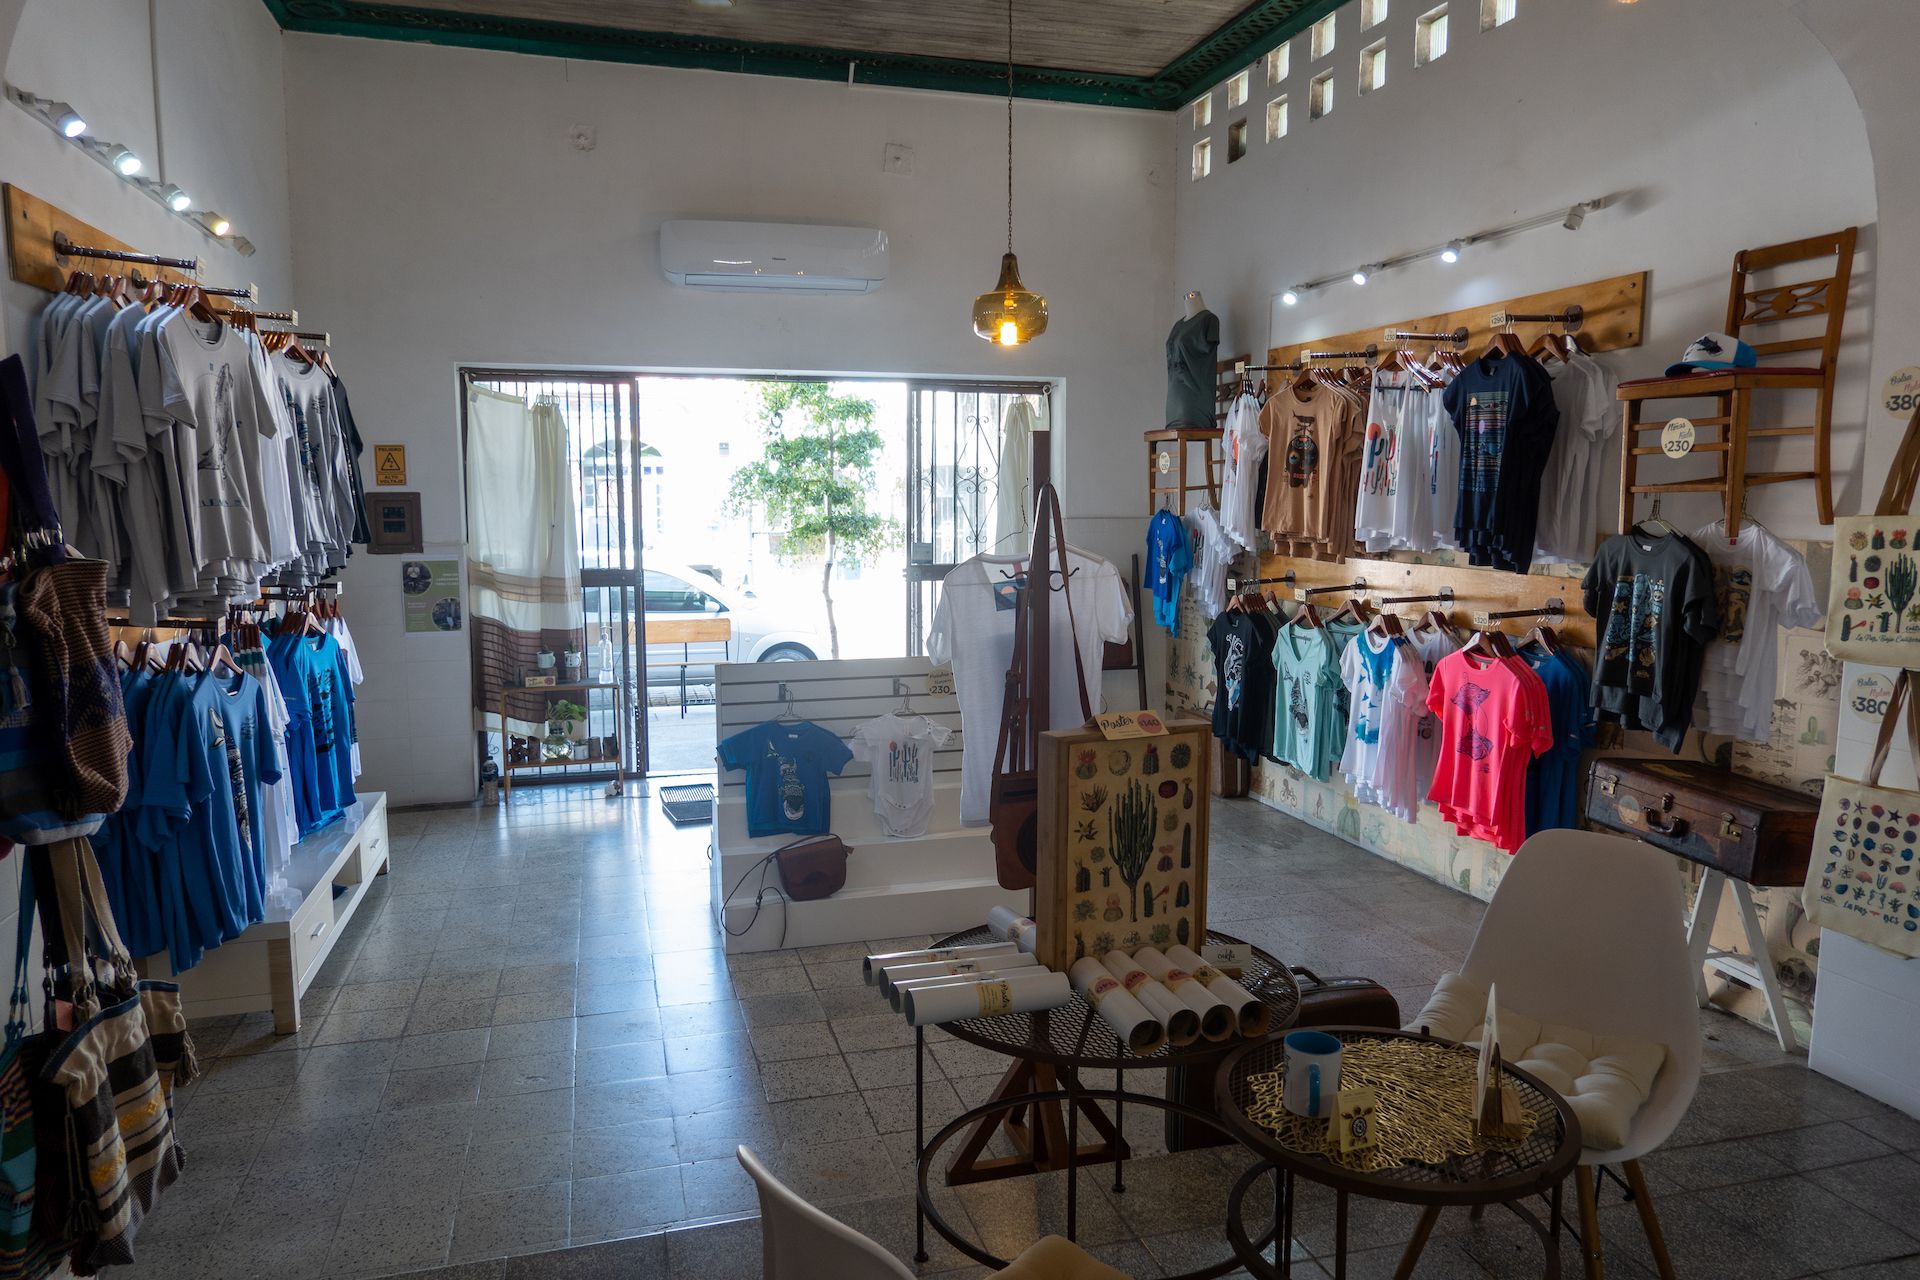 Souvenirs shop with locally made items